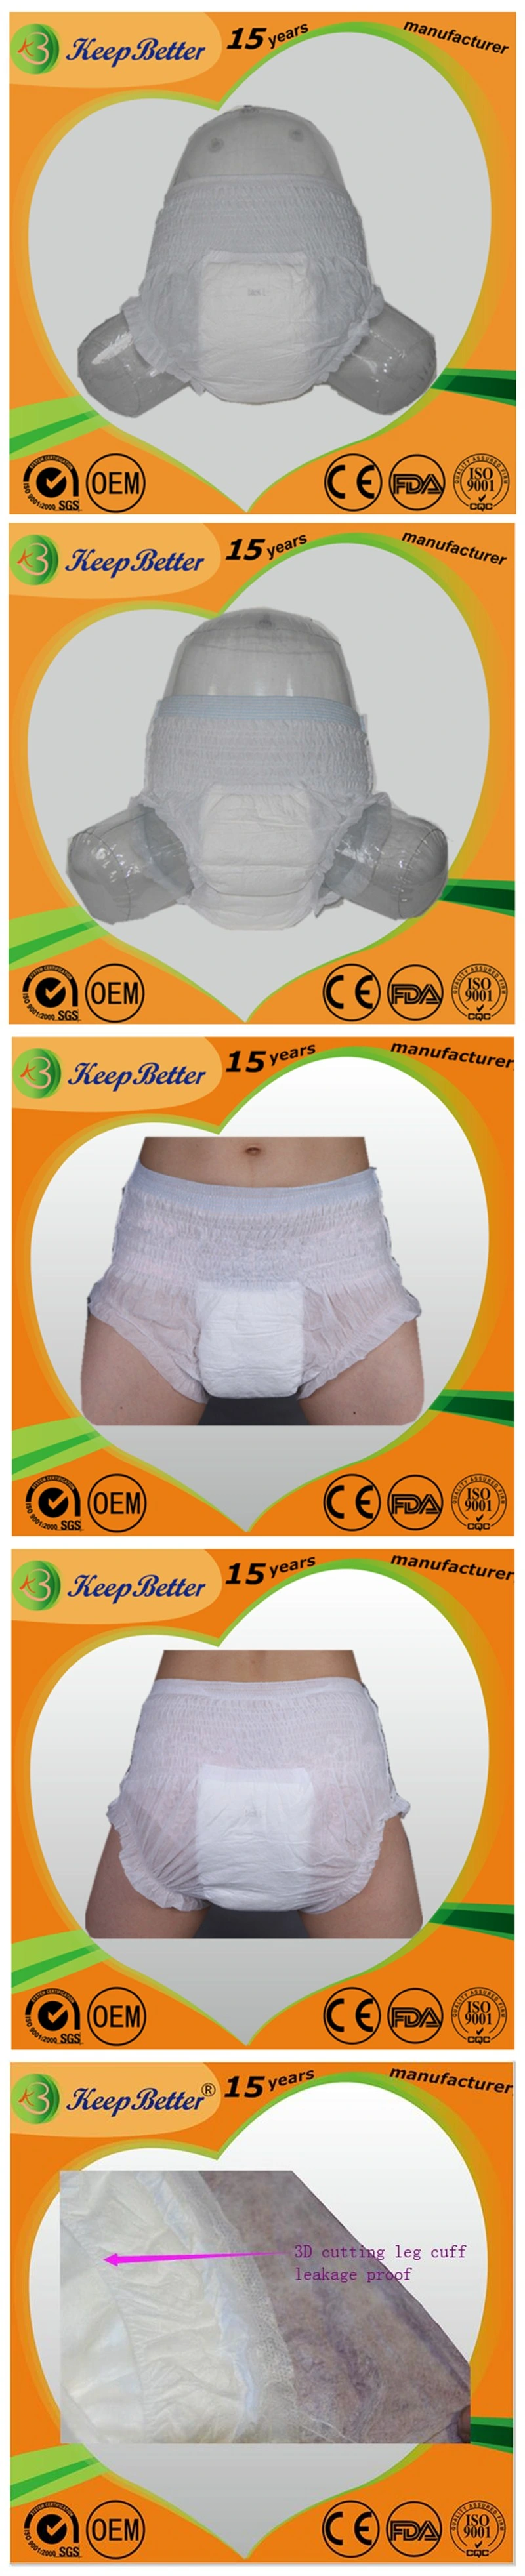 Overnight Disposable Adult Incontinence Pull up Diapers Nappies for Adults